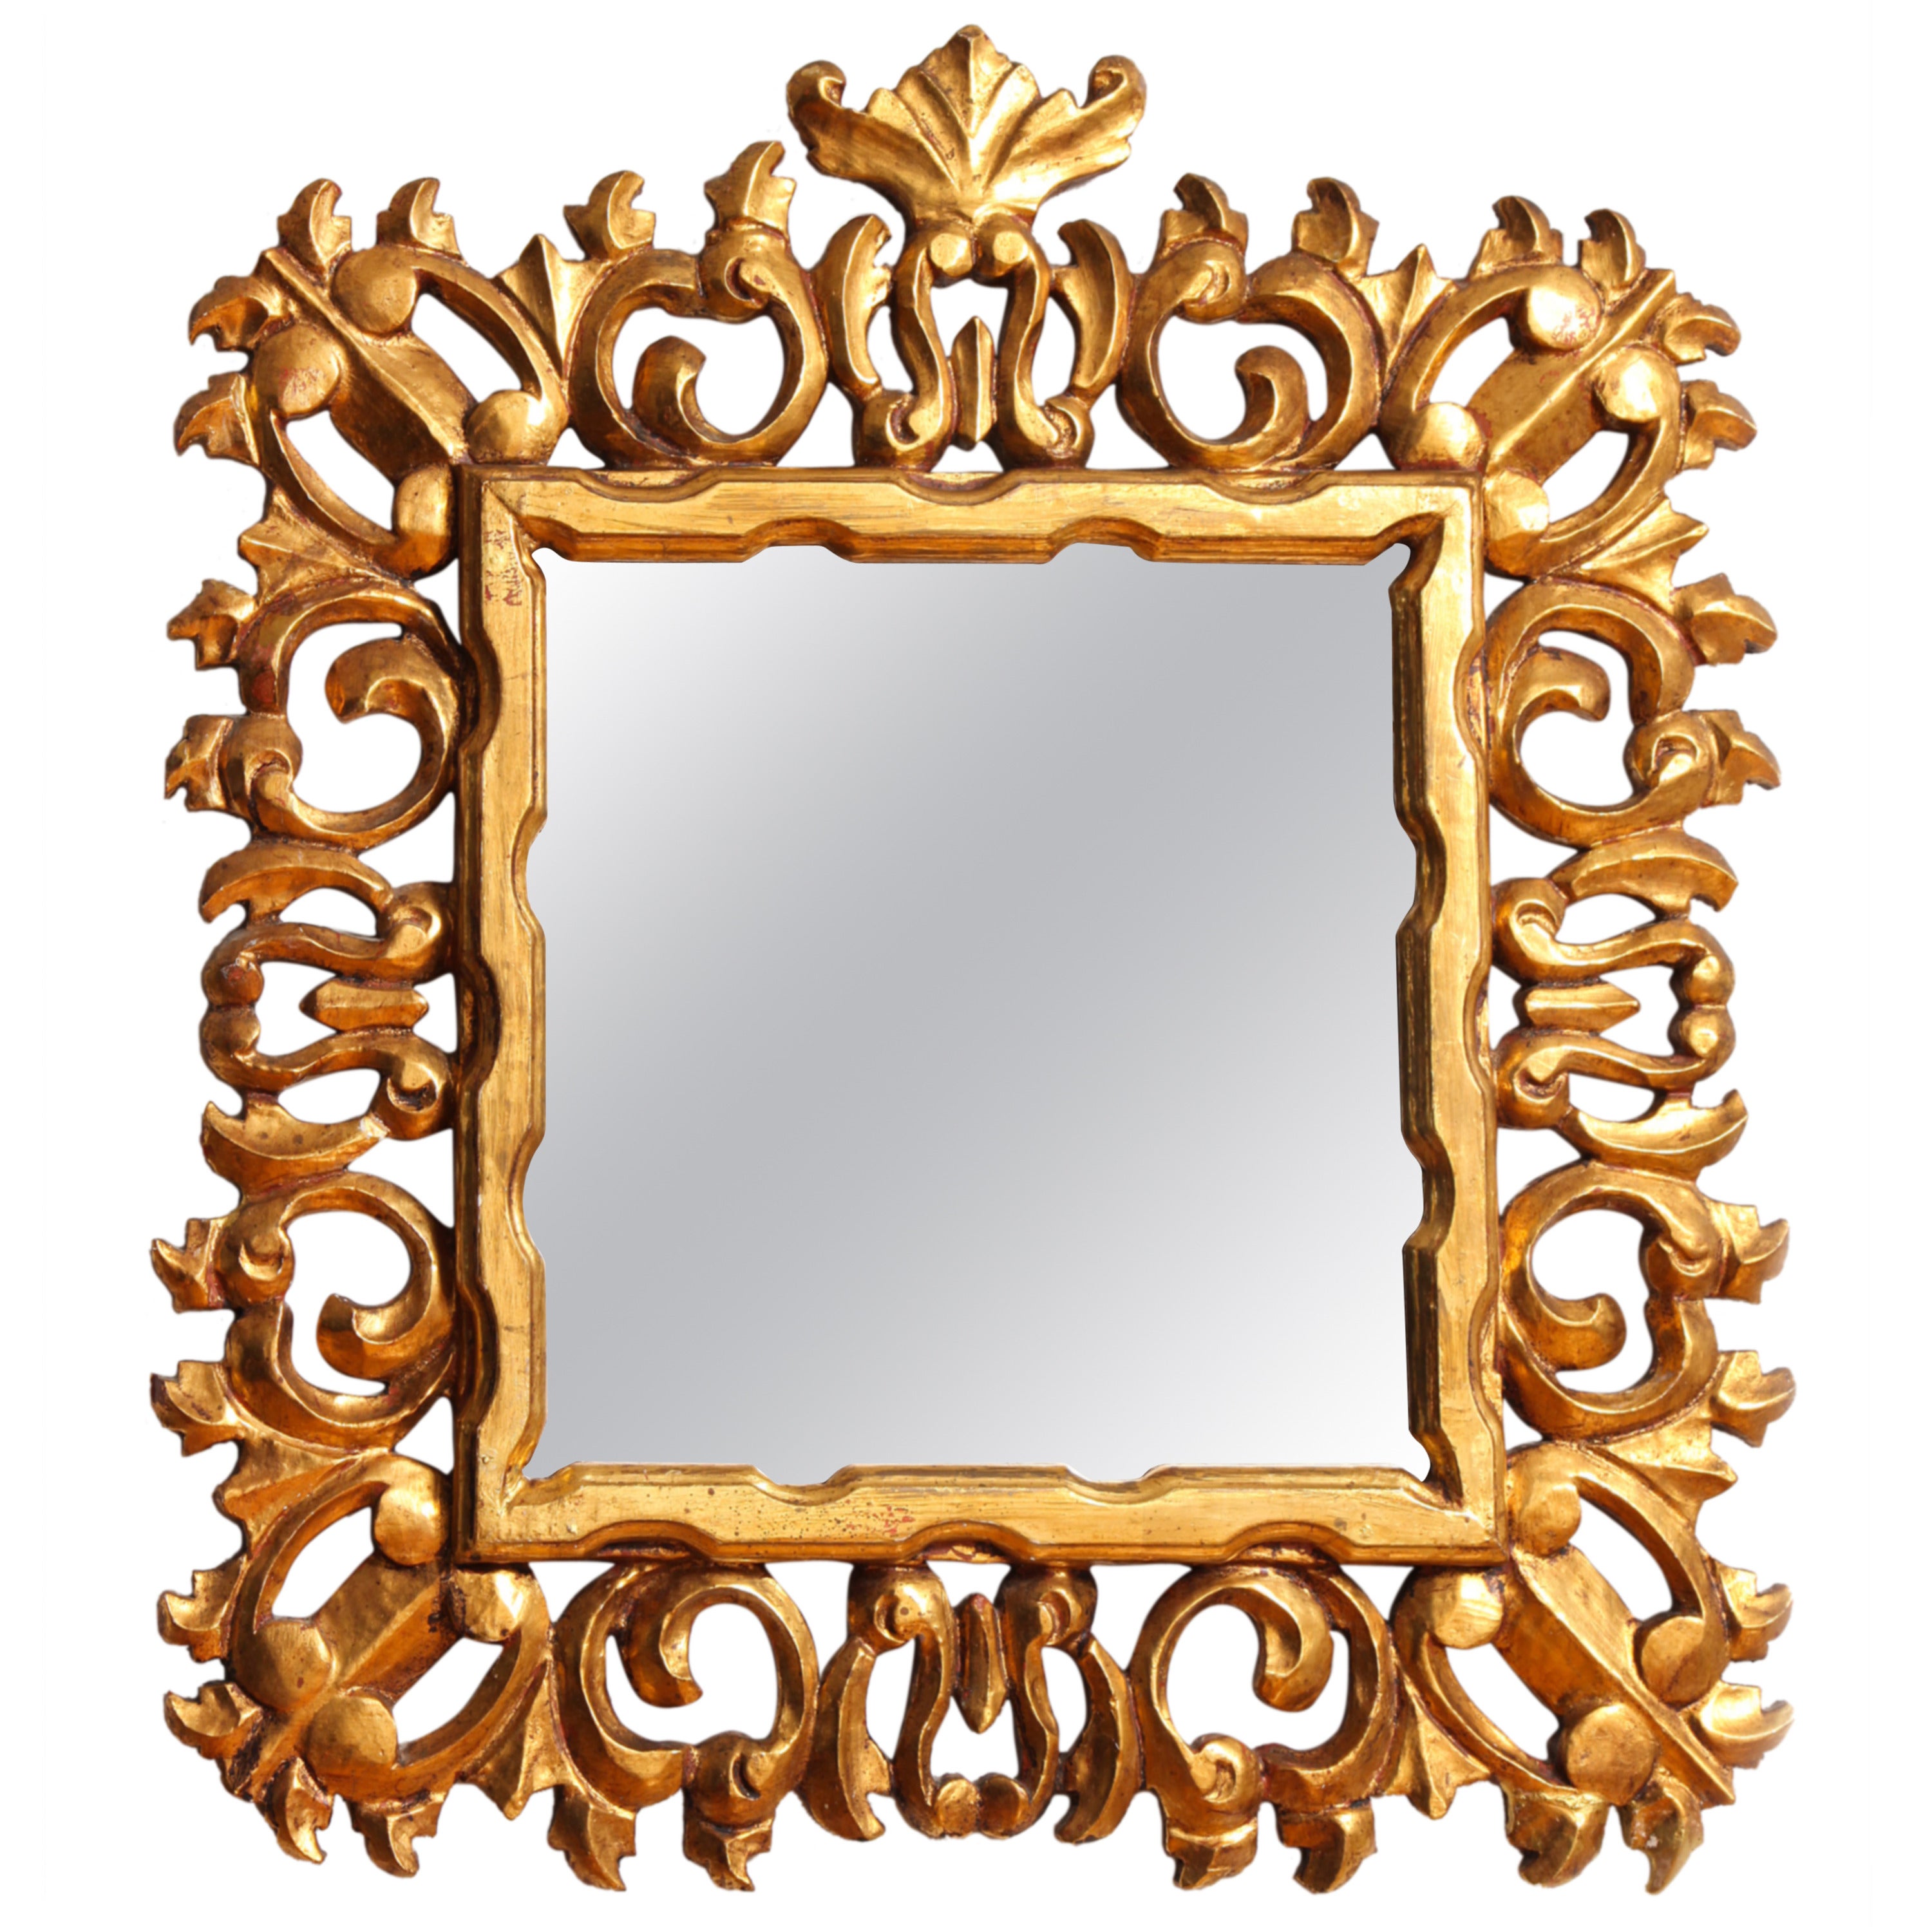 Carved and Gilded Italian Baroque Style Mirror Frame